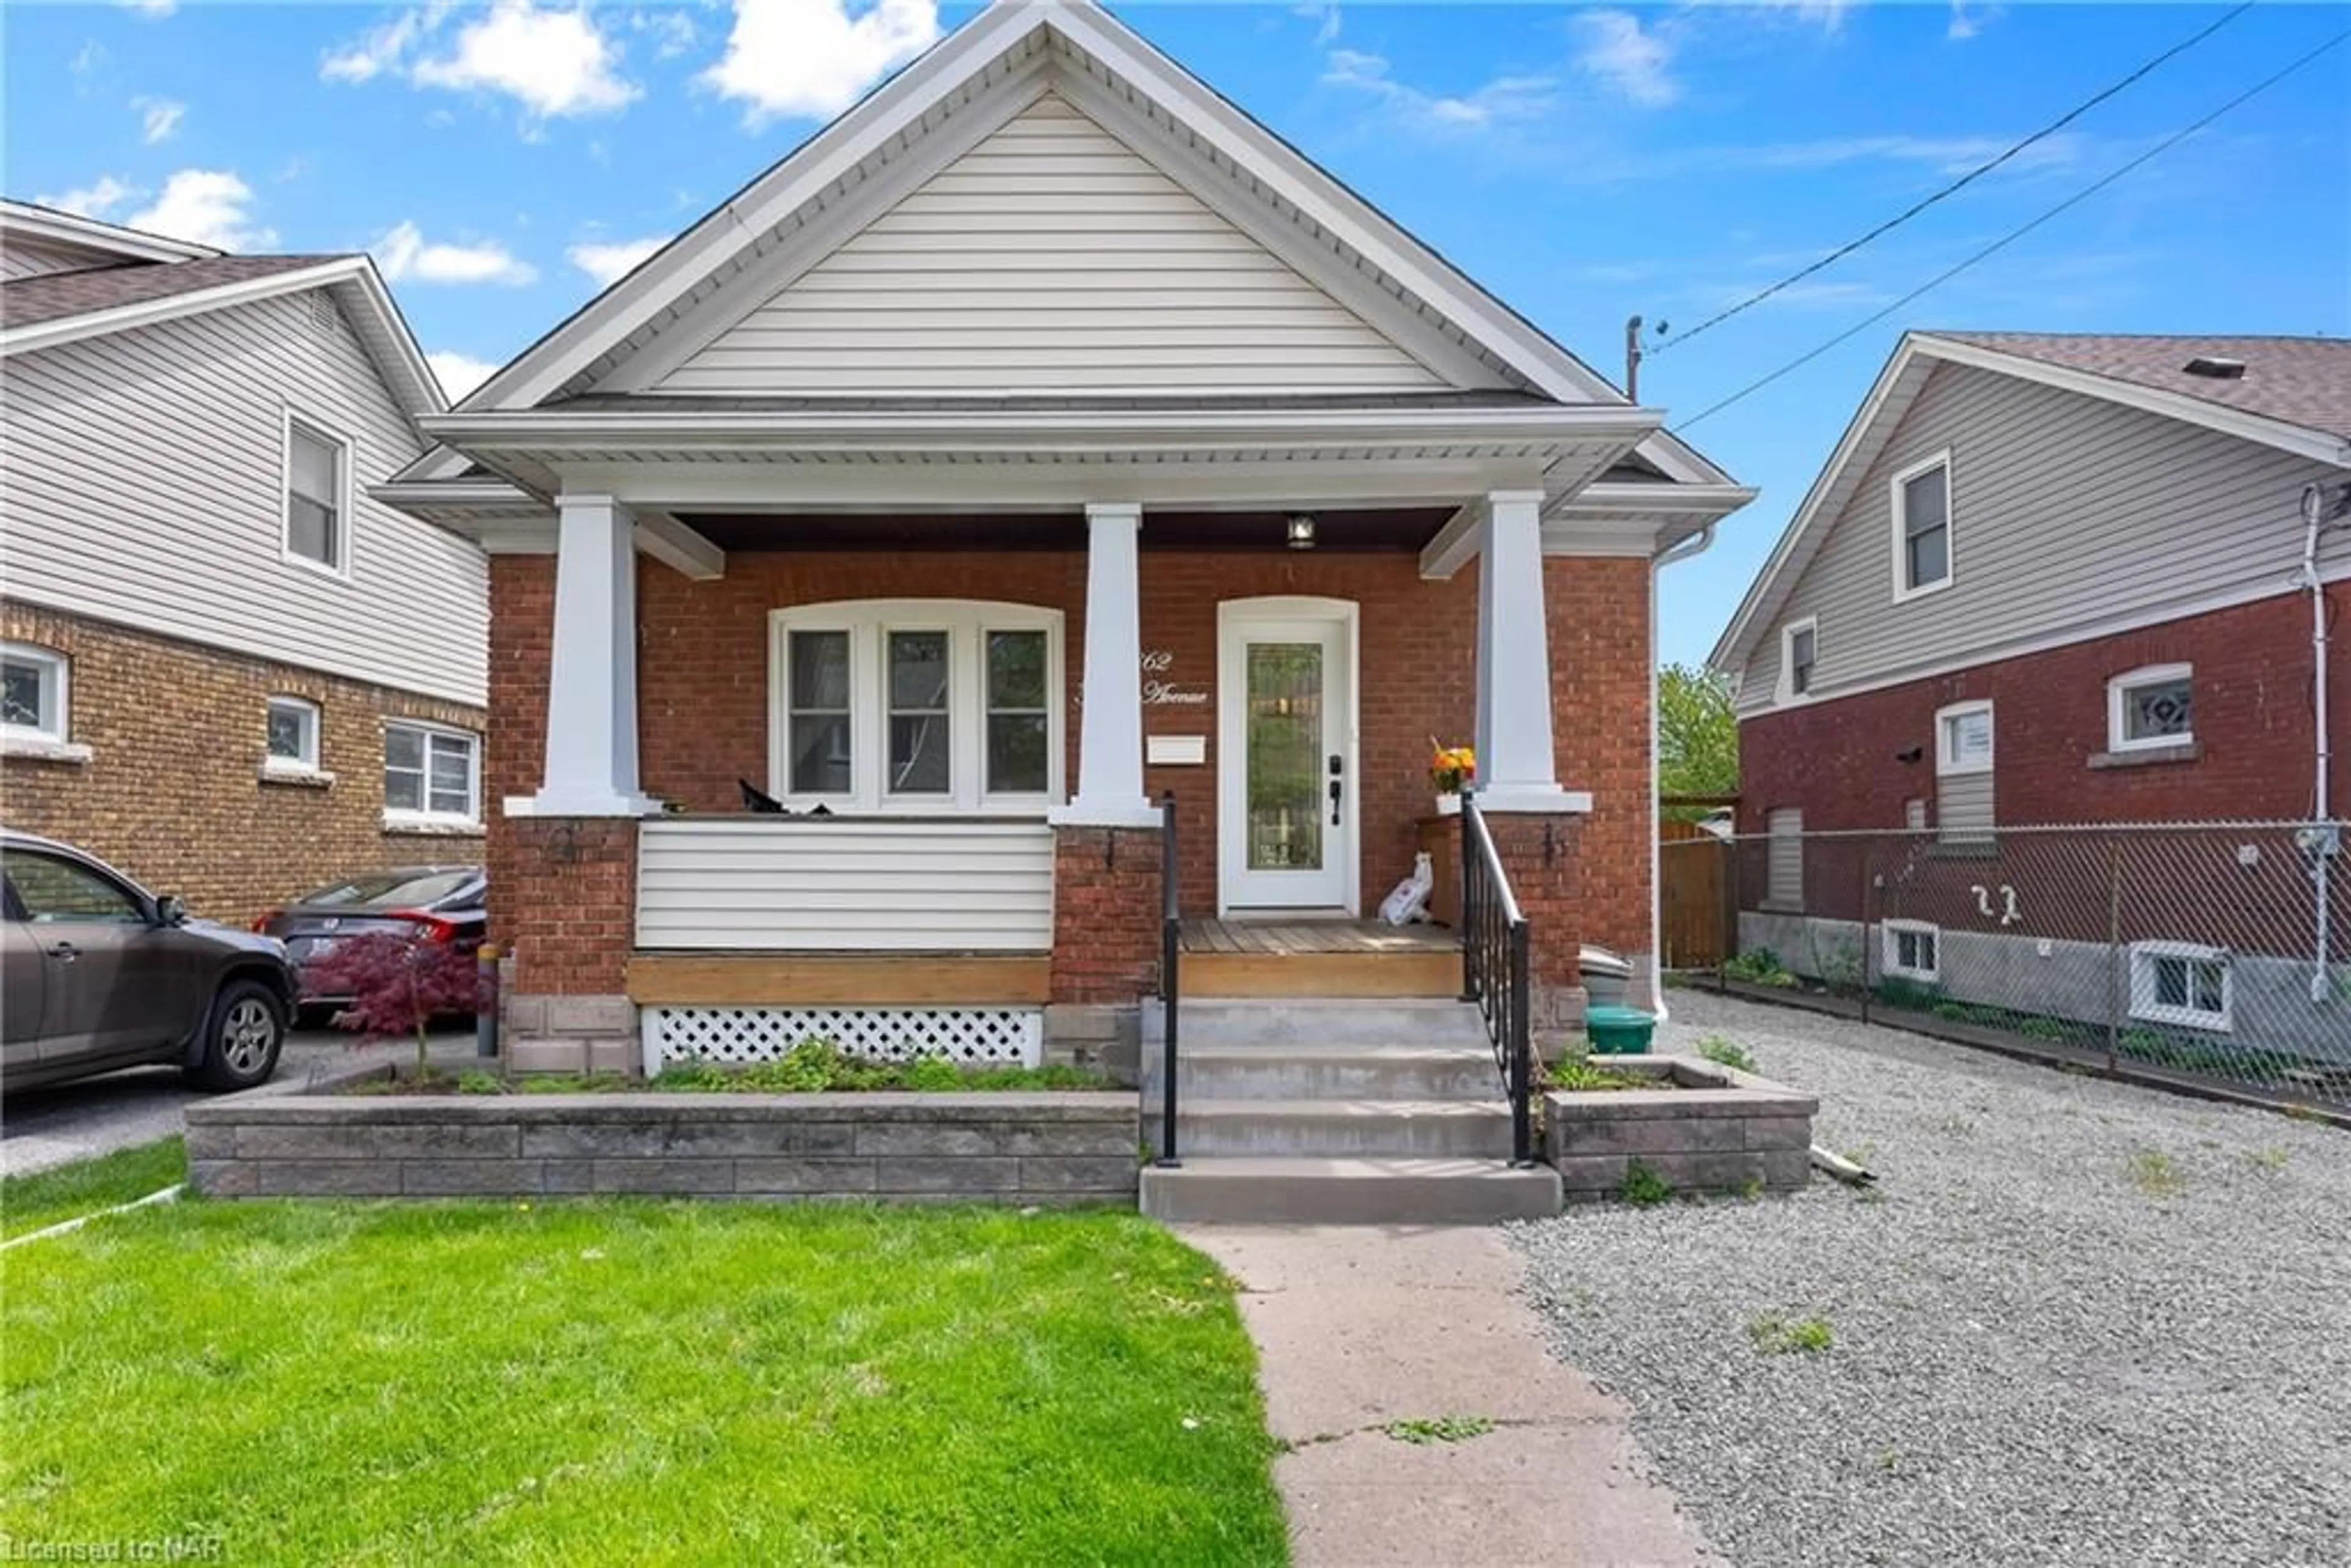 Frontside or backside of a home for 4862 Fourth Ave, Niagara Falls Ontario L2E 4P1